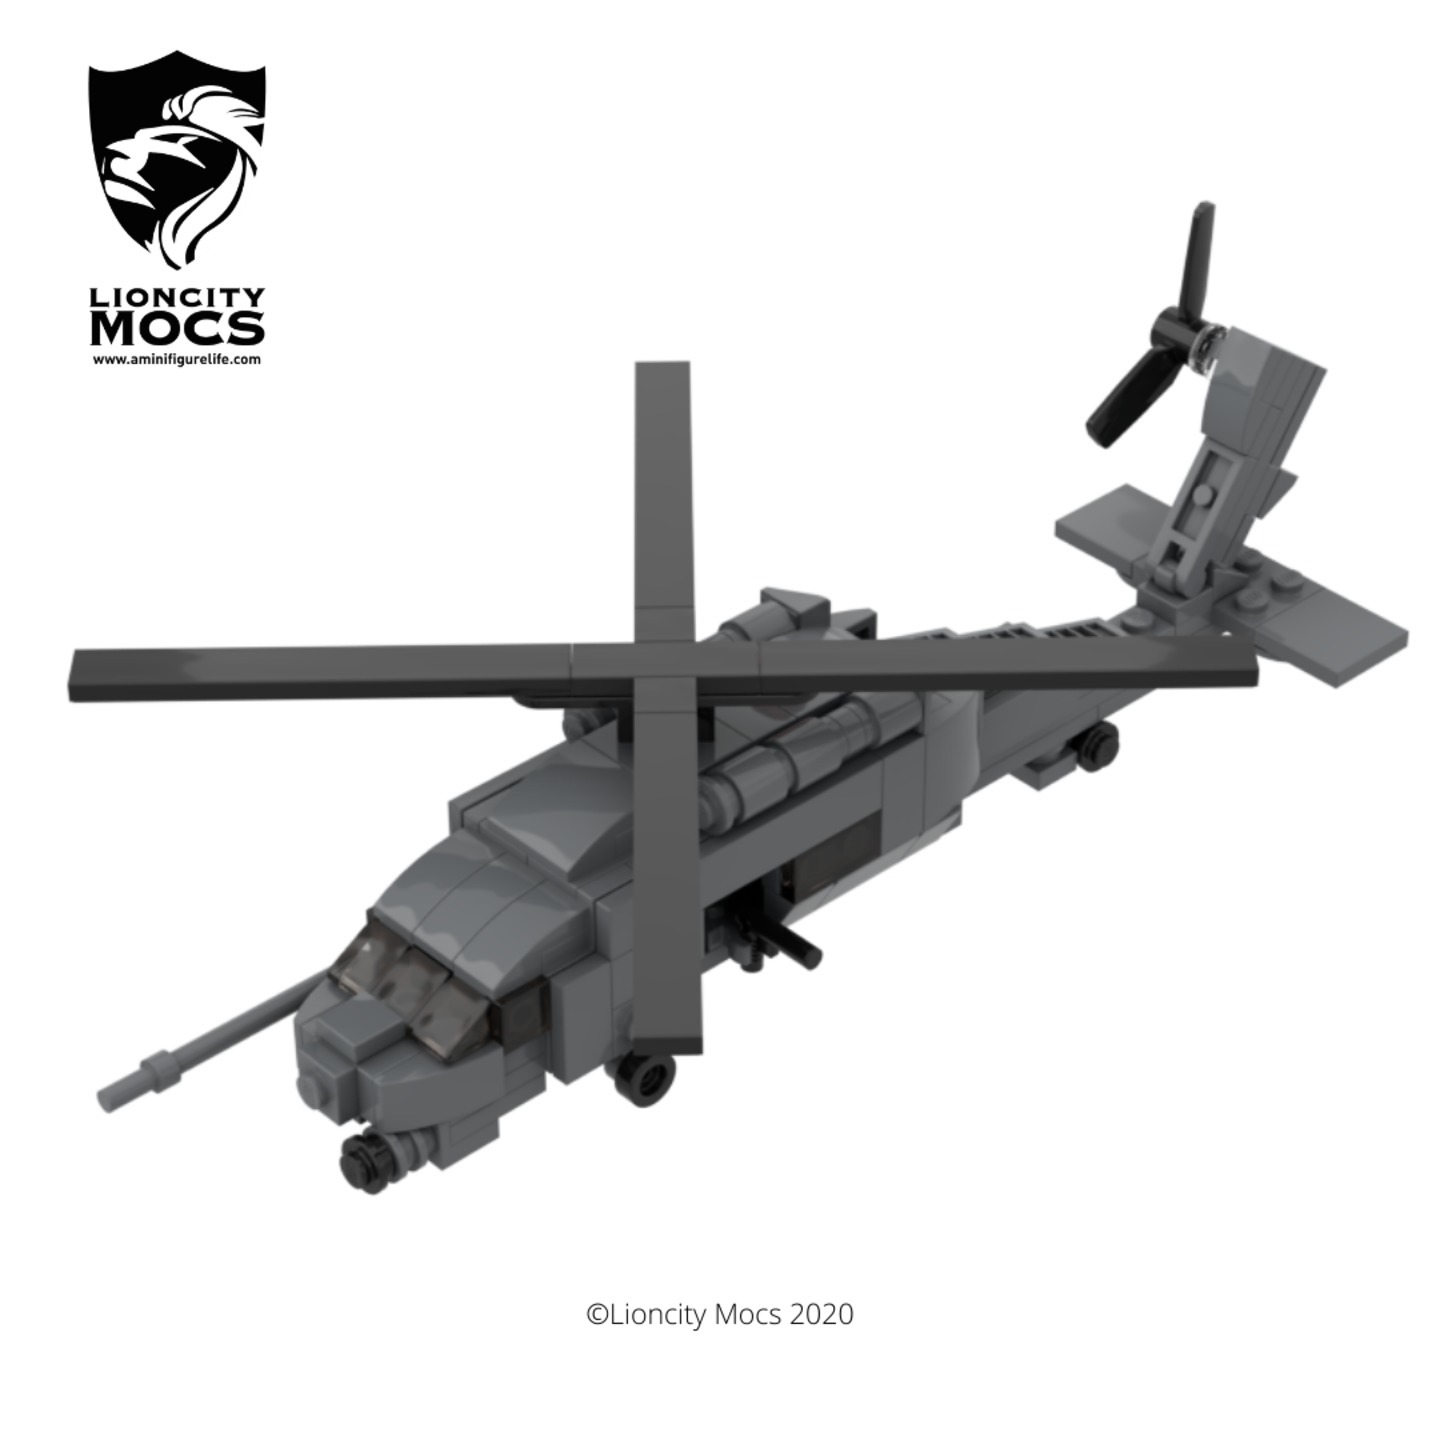 [PDF Instructions Only] HH-60 Pavehawk Helicopter Mini